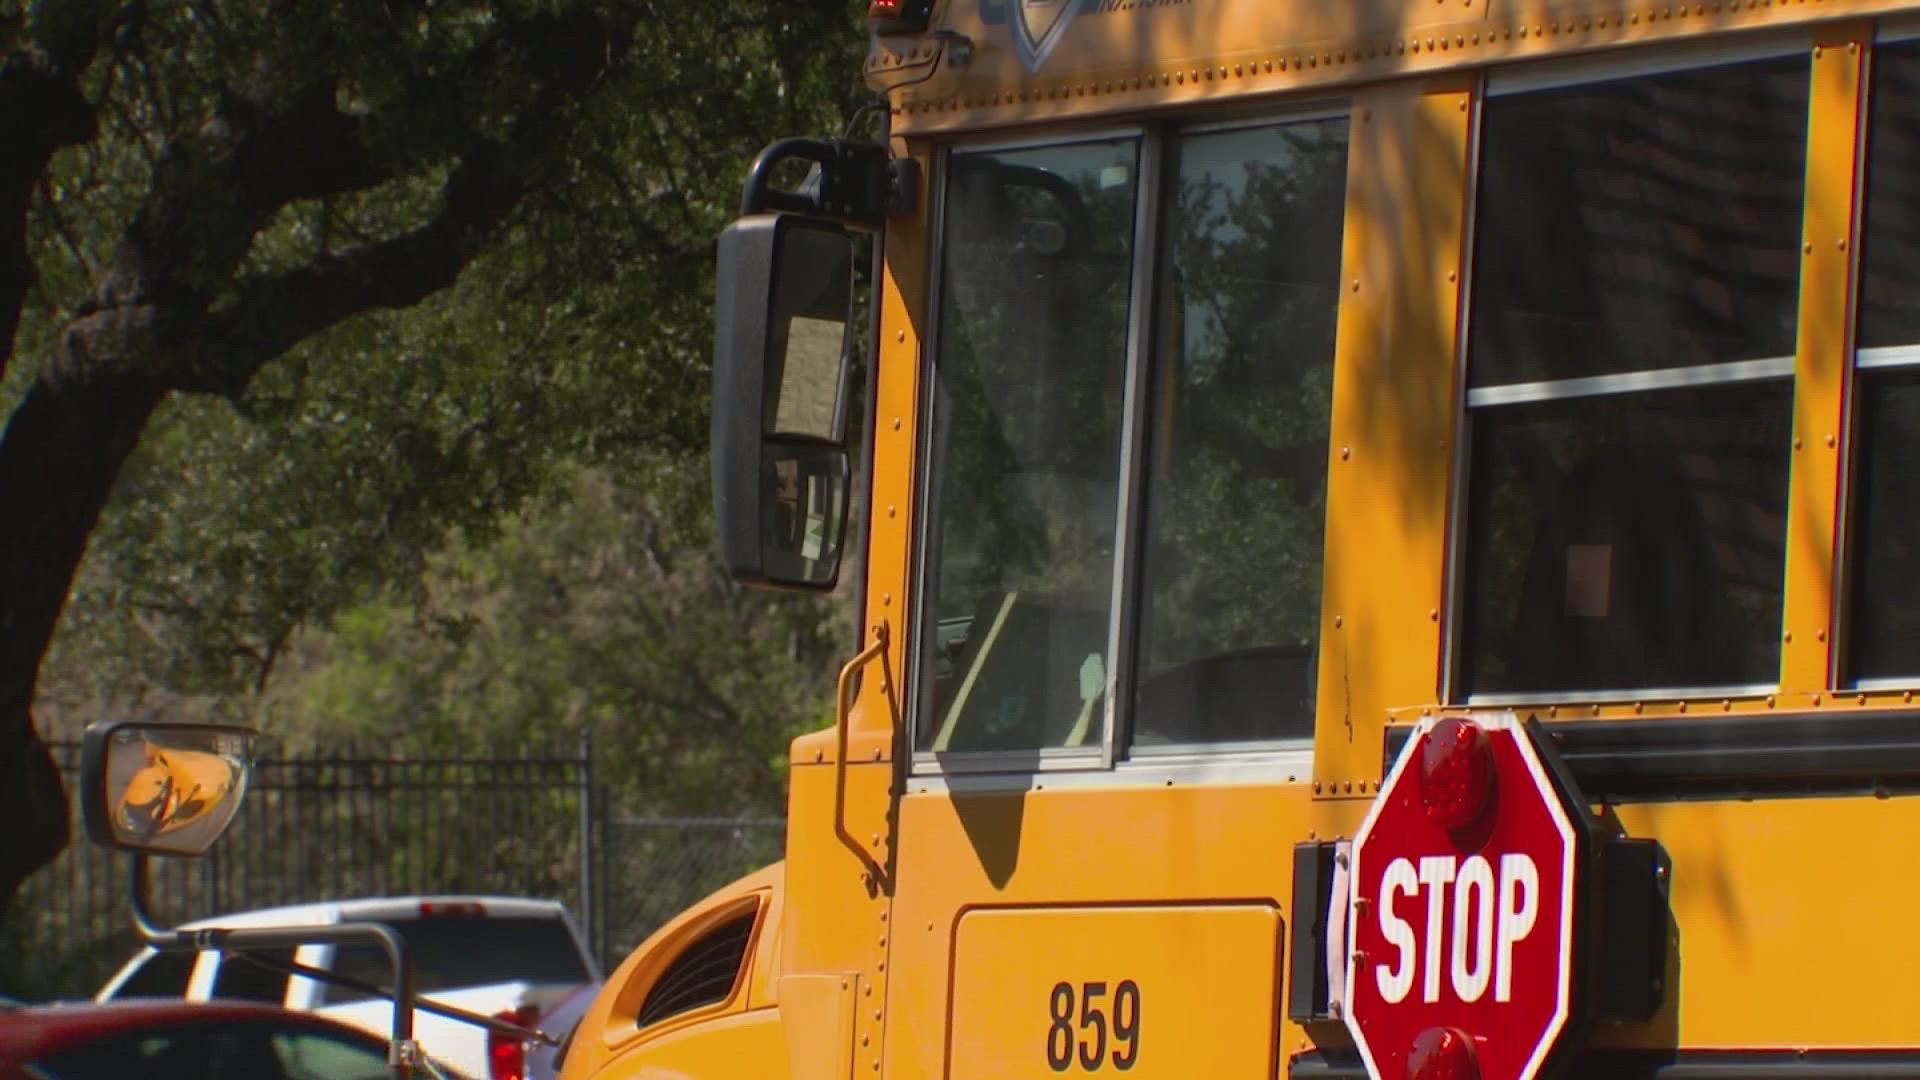 Parents are upset with Fort Worth ISD after school bus drivers dropped off kids at the wrong stops multiple times.